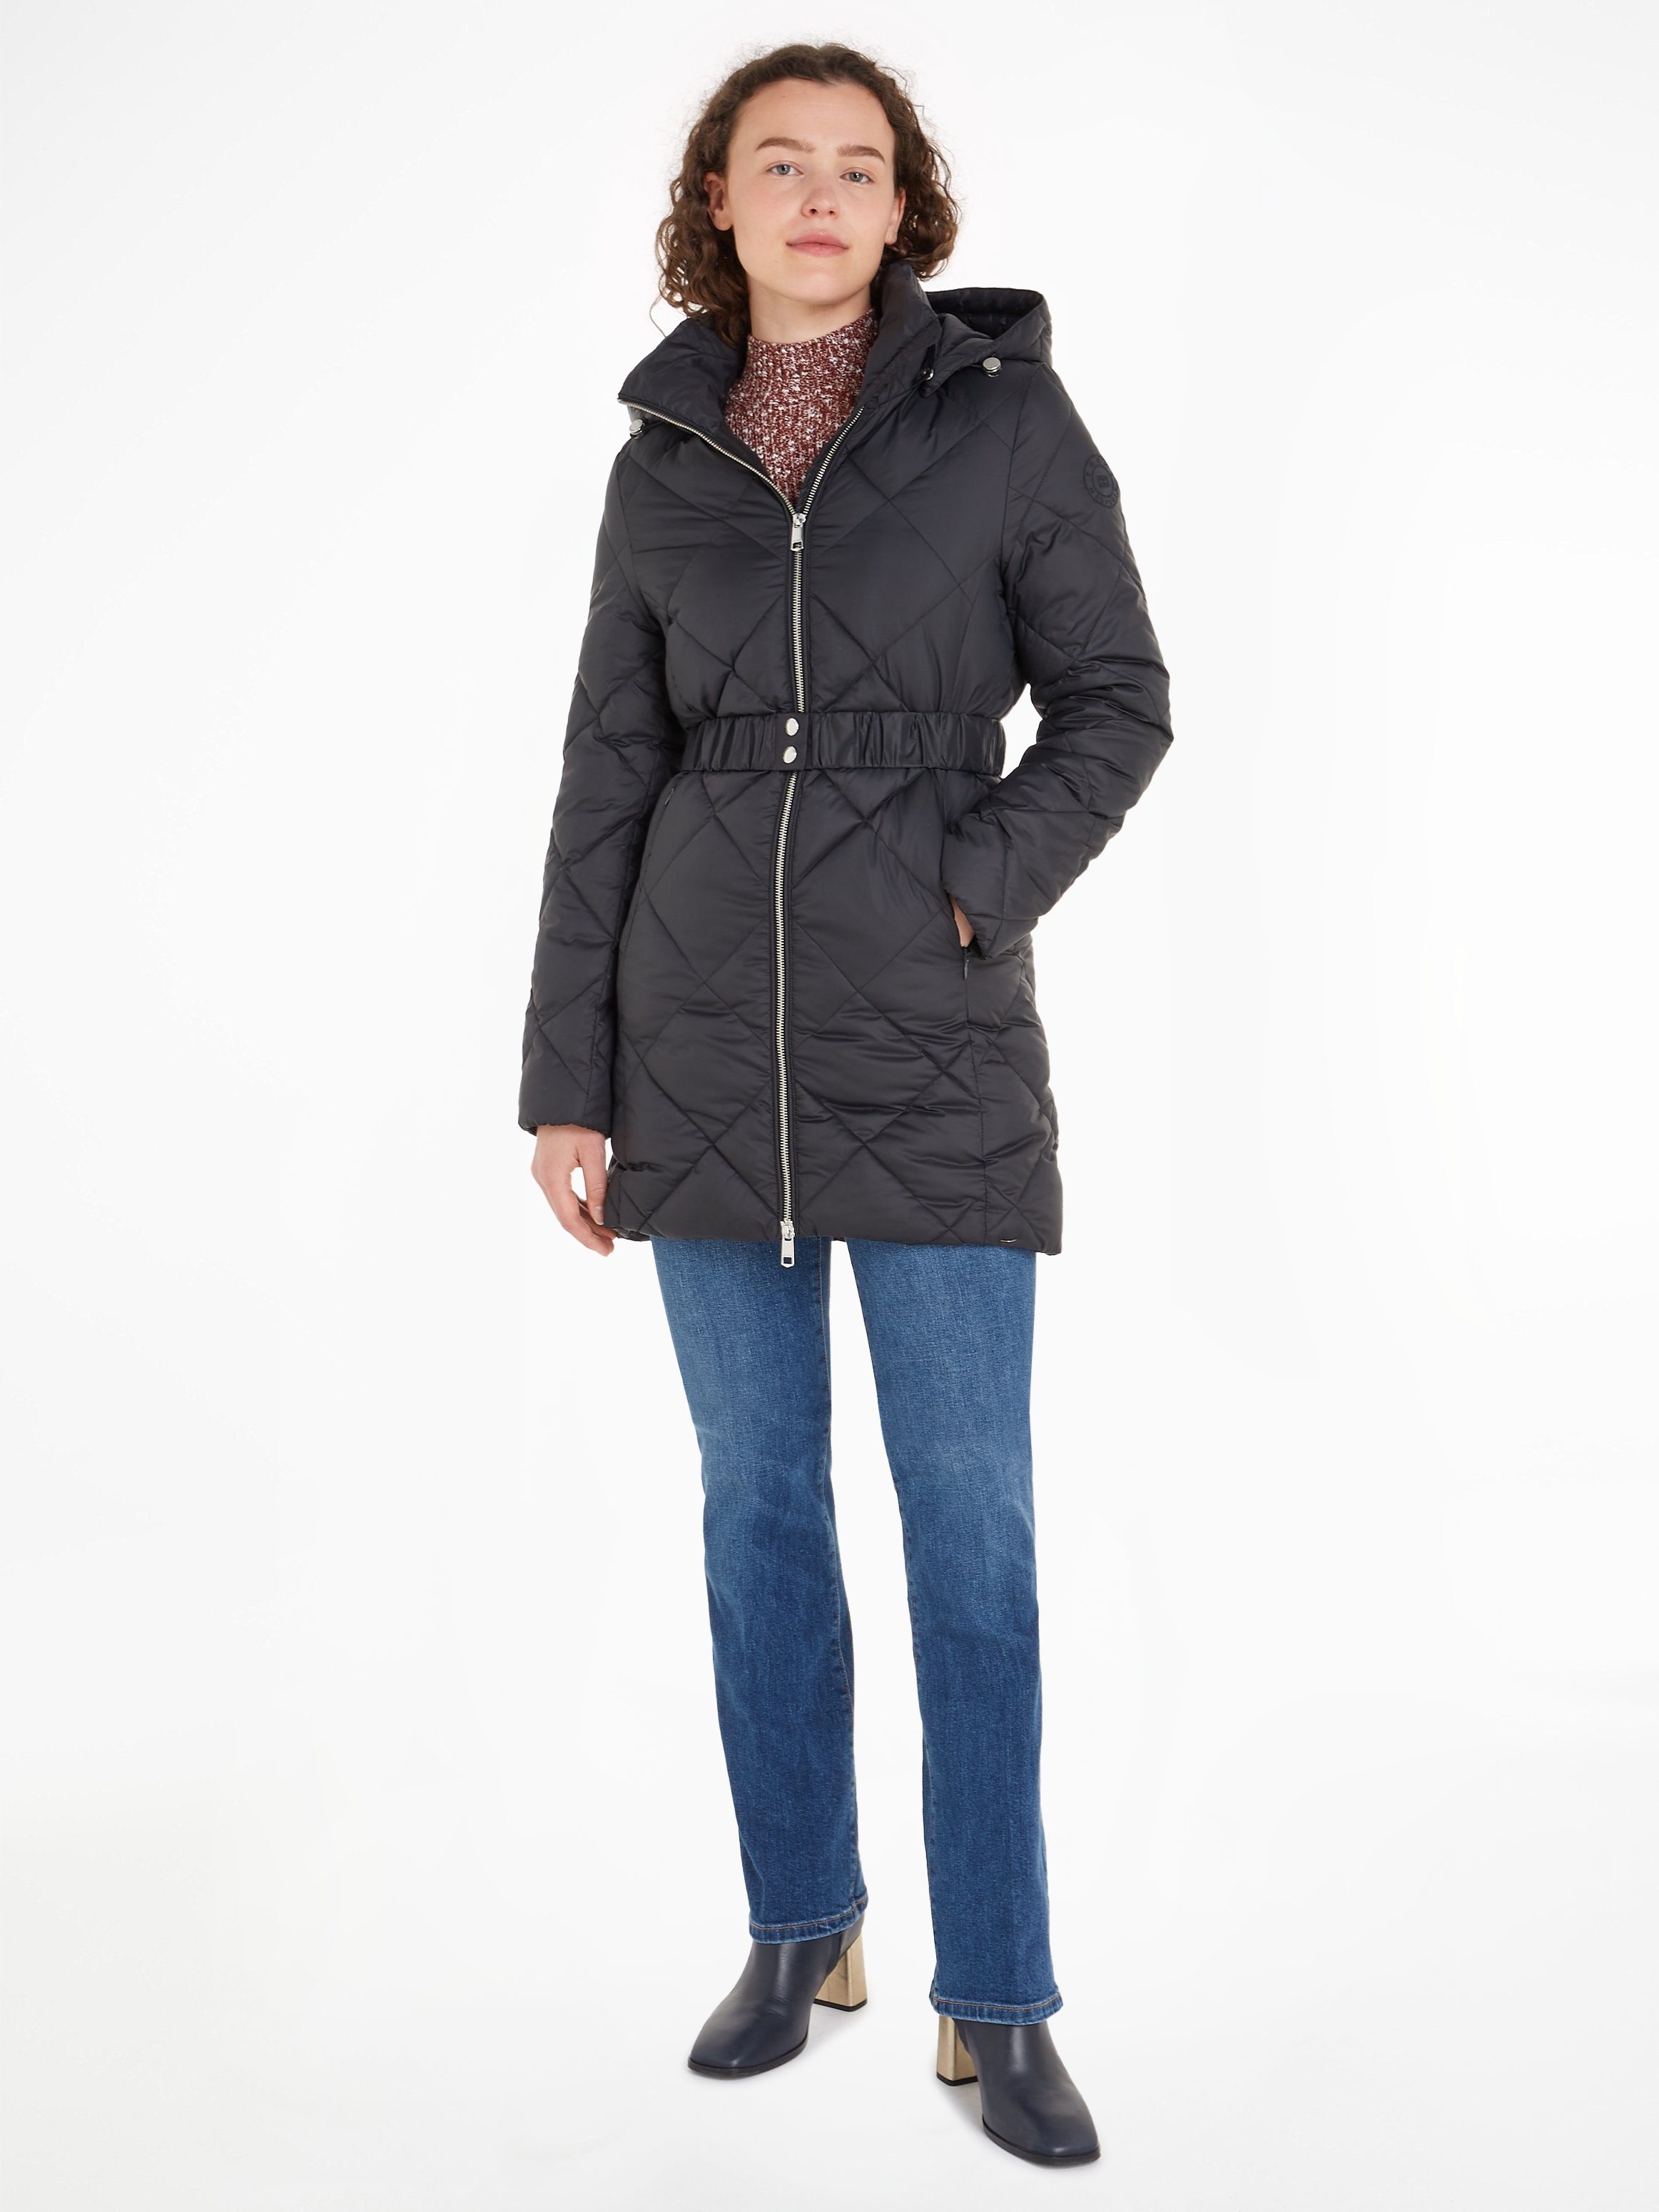 QUILTED abnehmbarer Kapuze mit Steppmantel COAT BELTED Hilfiger ELEVATED Tommy